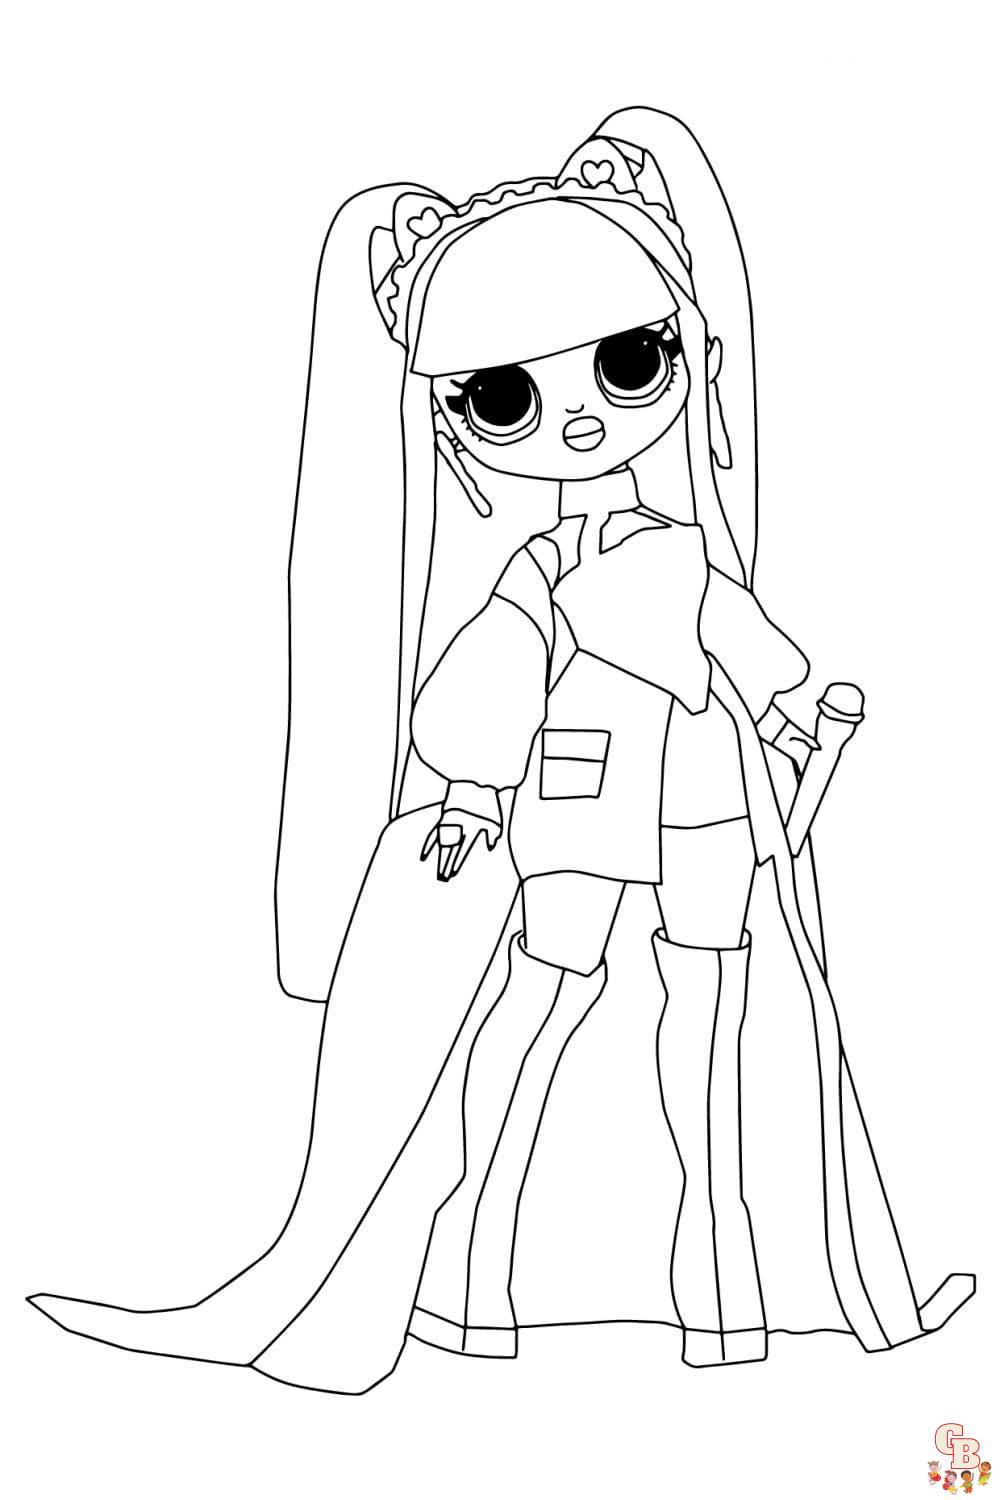 omg fashion lol omg doll coloring pages 12